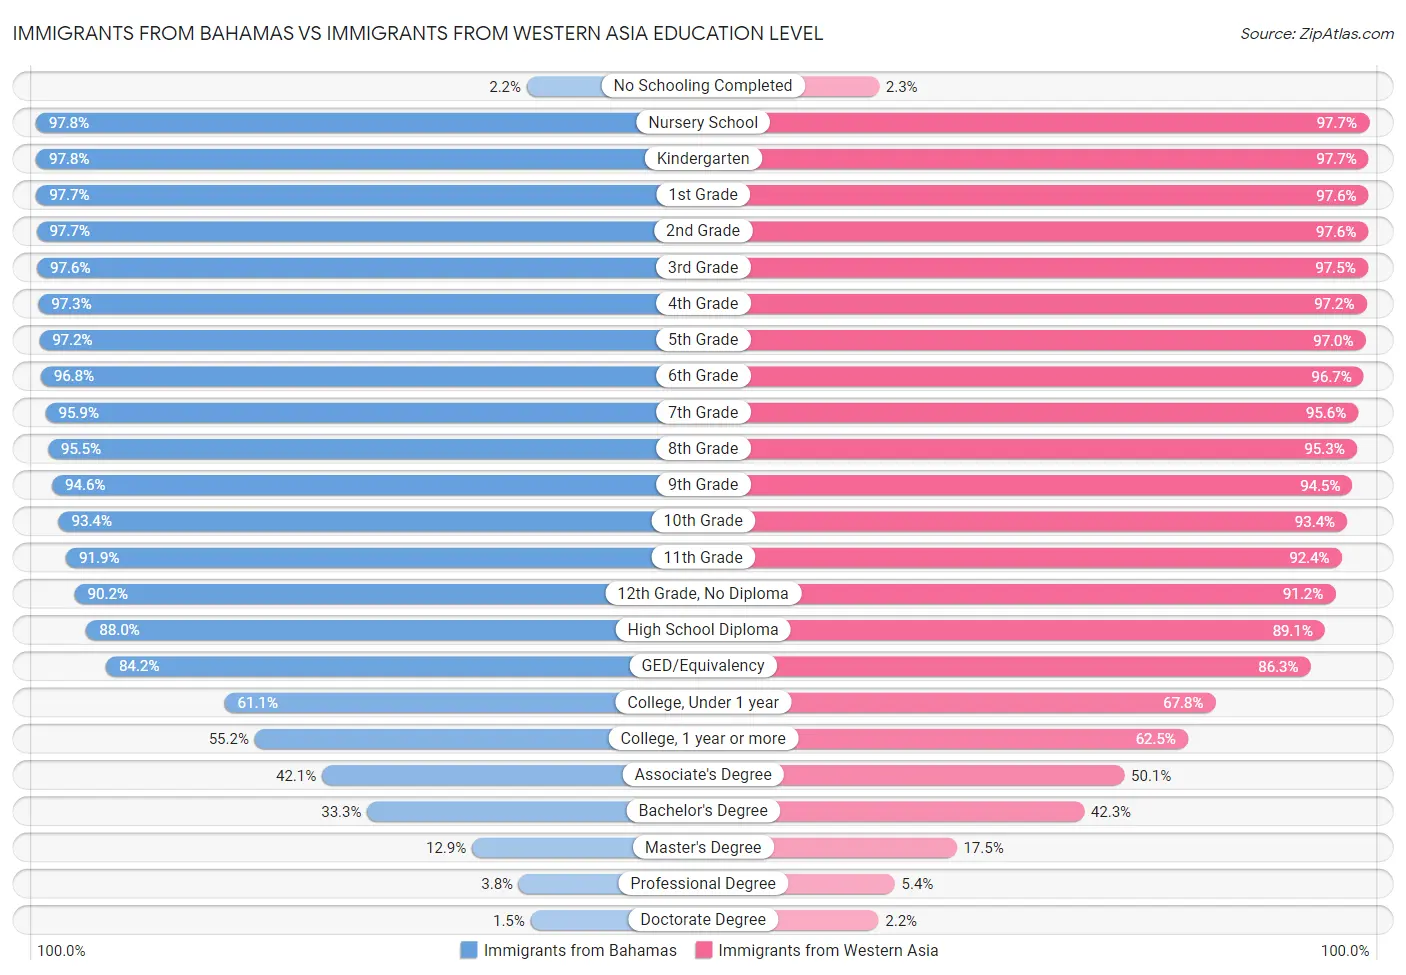 Immigrants from Bahamas vs Immigrants from Western Asia Education Level